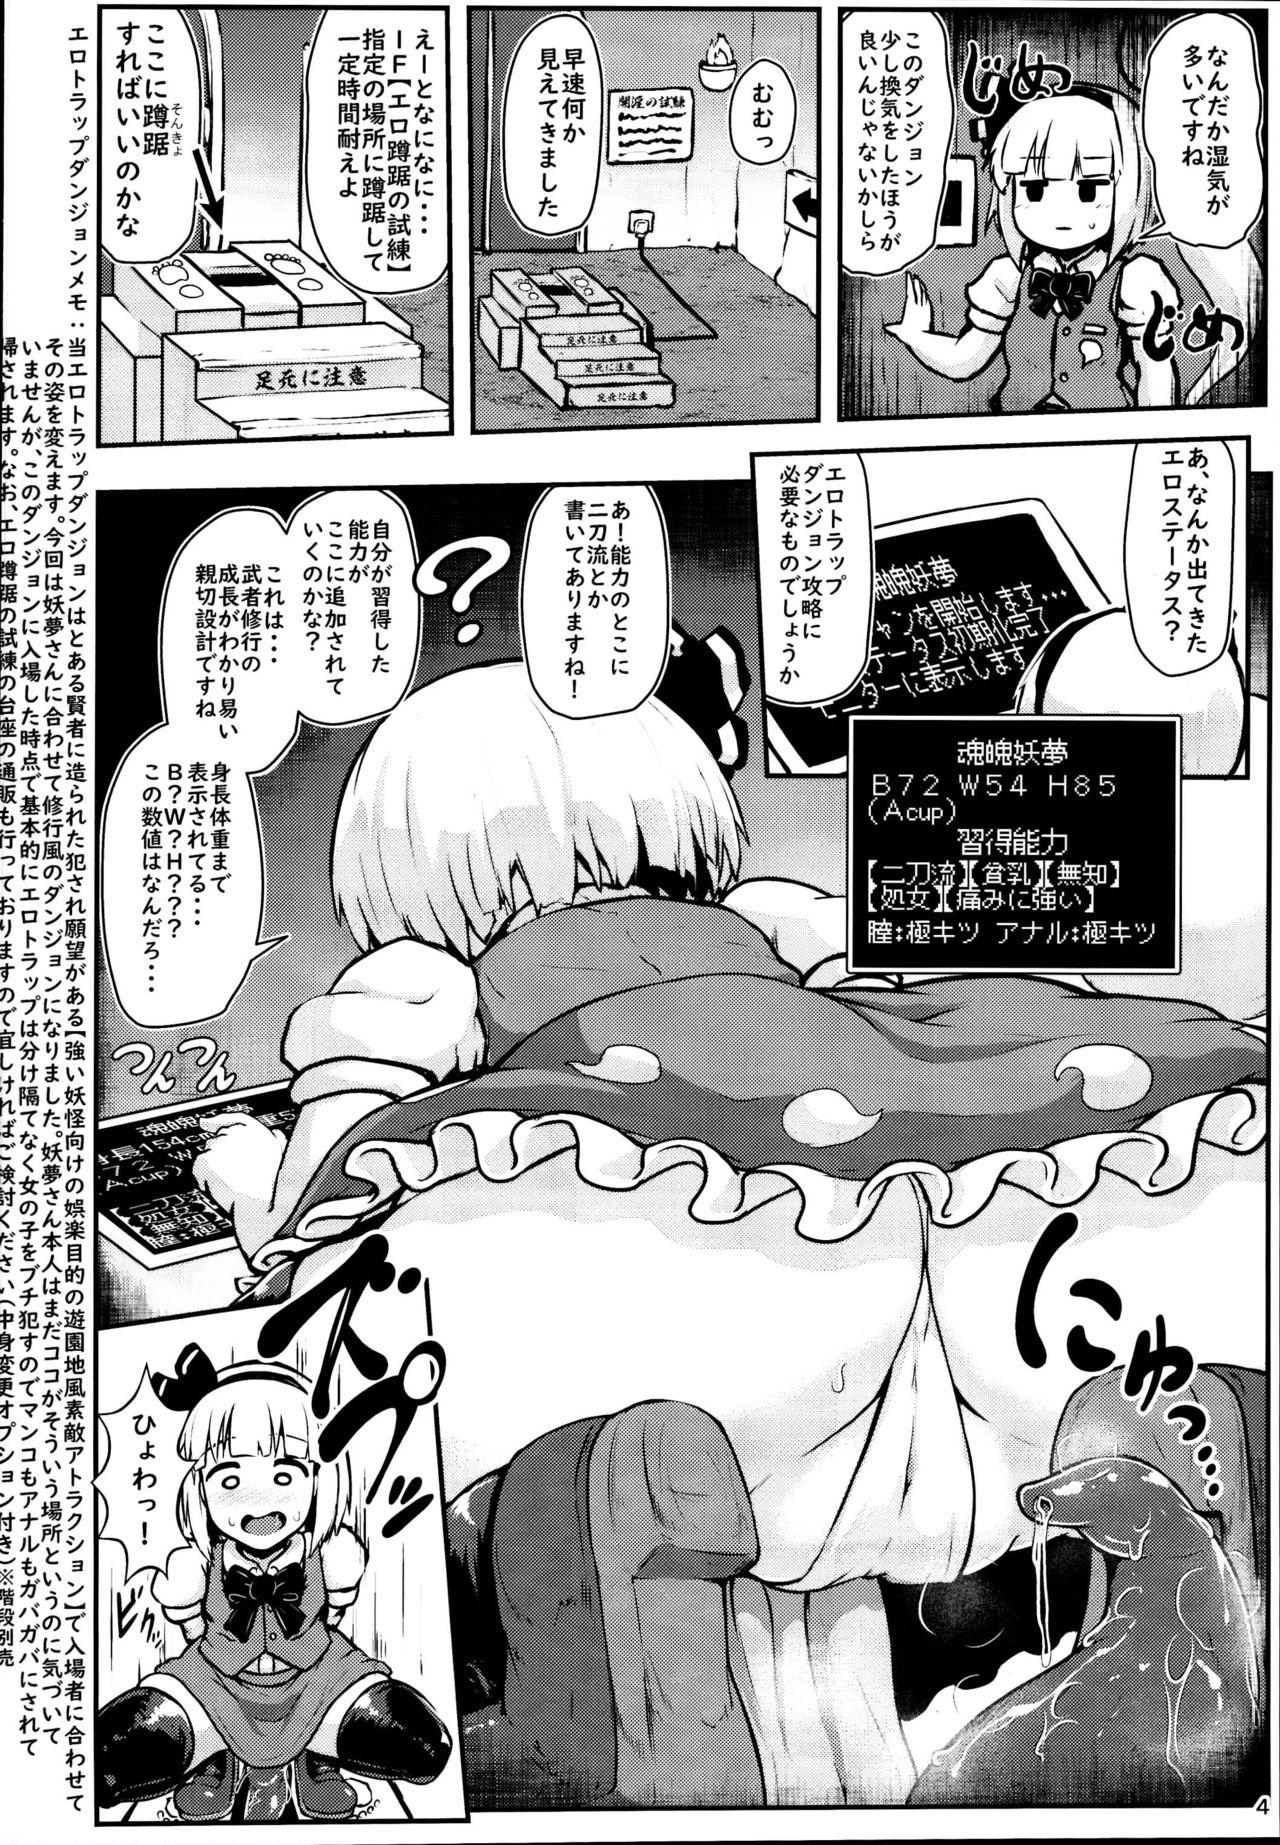 Edging Youmu in Ero Trap Dungeon - Touhou project Big Dick - Page 4